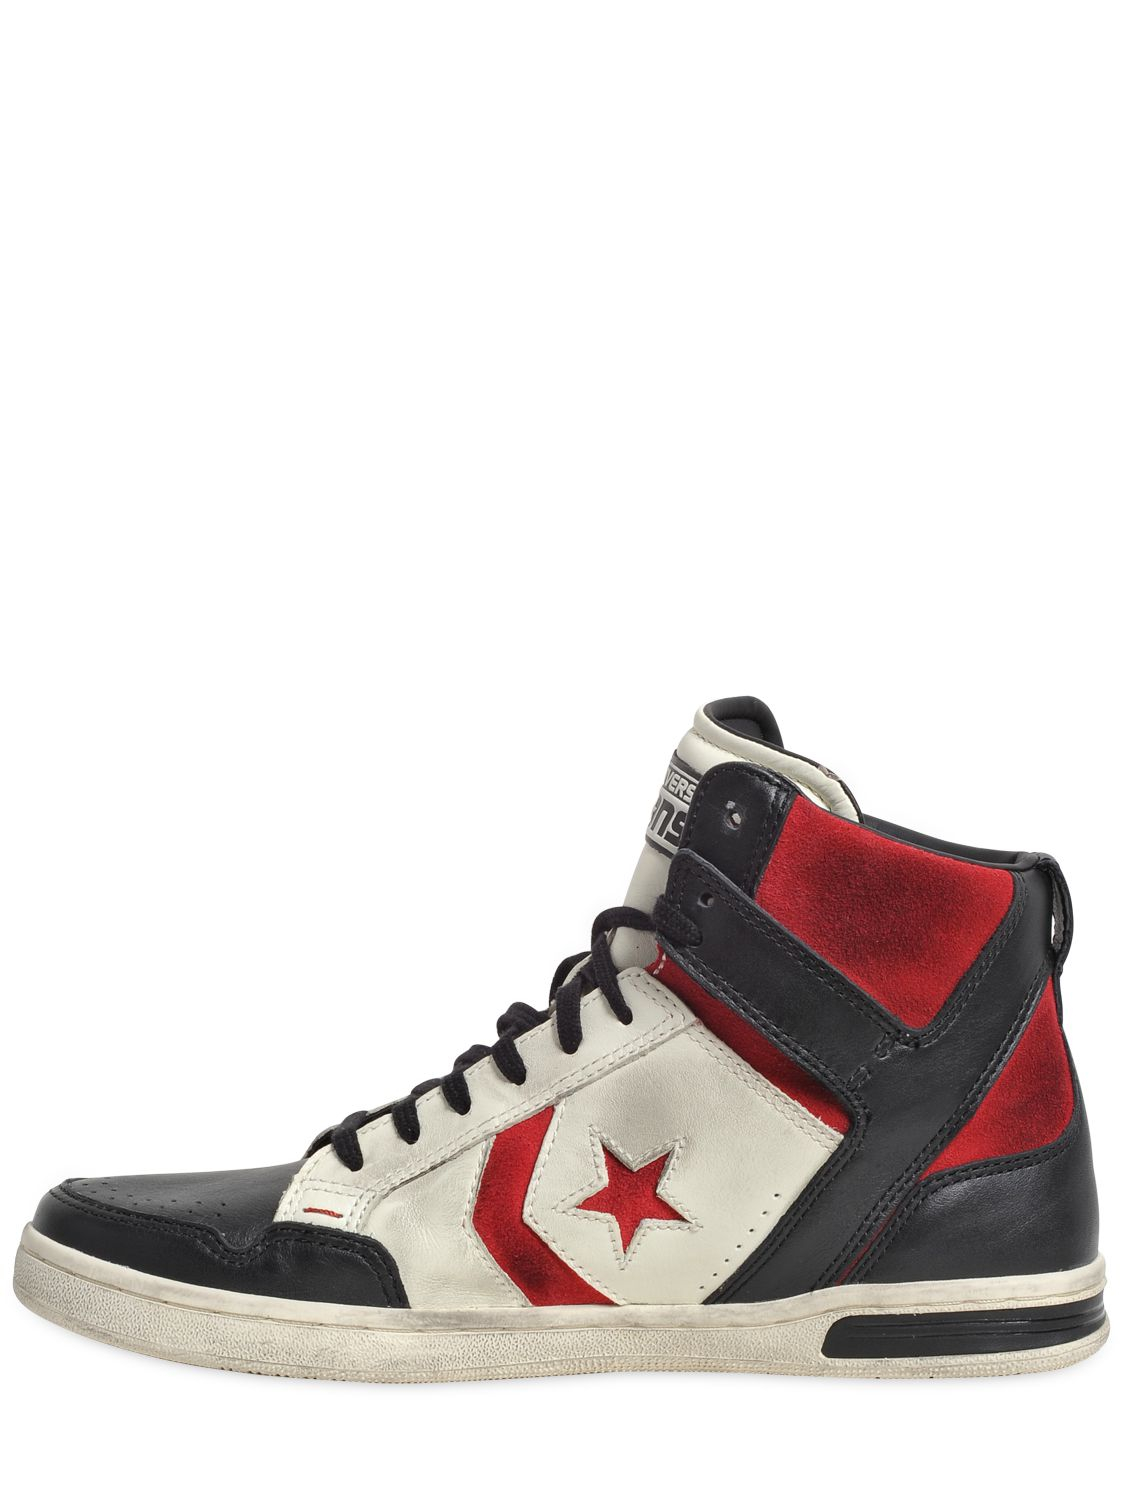 Converse Weapon Leather High Top Sneakers in White for Men | Lyst قشرة الشعر الدهنية